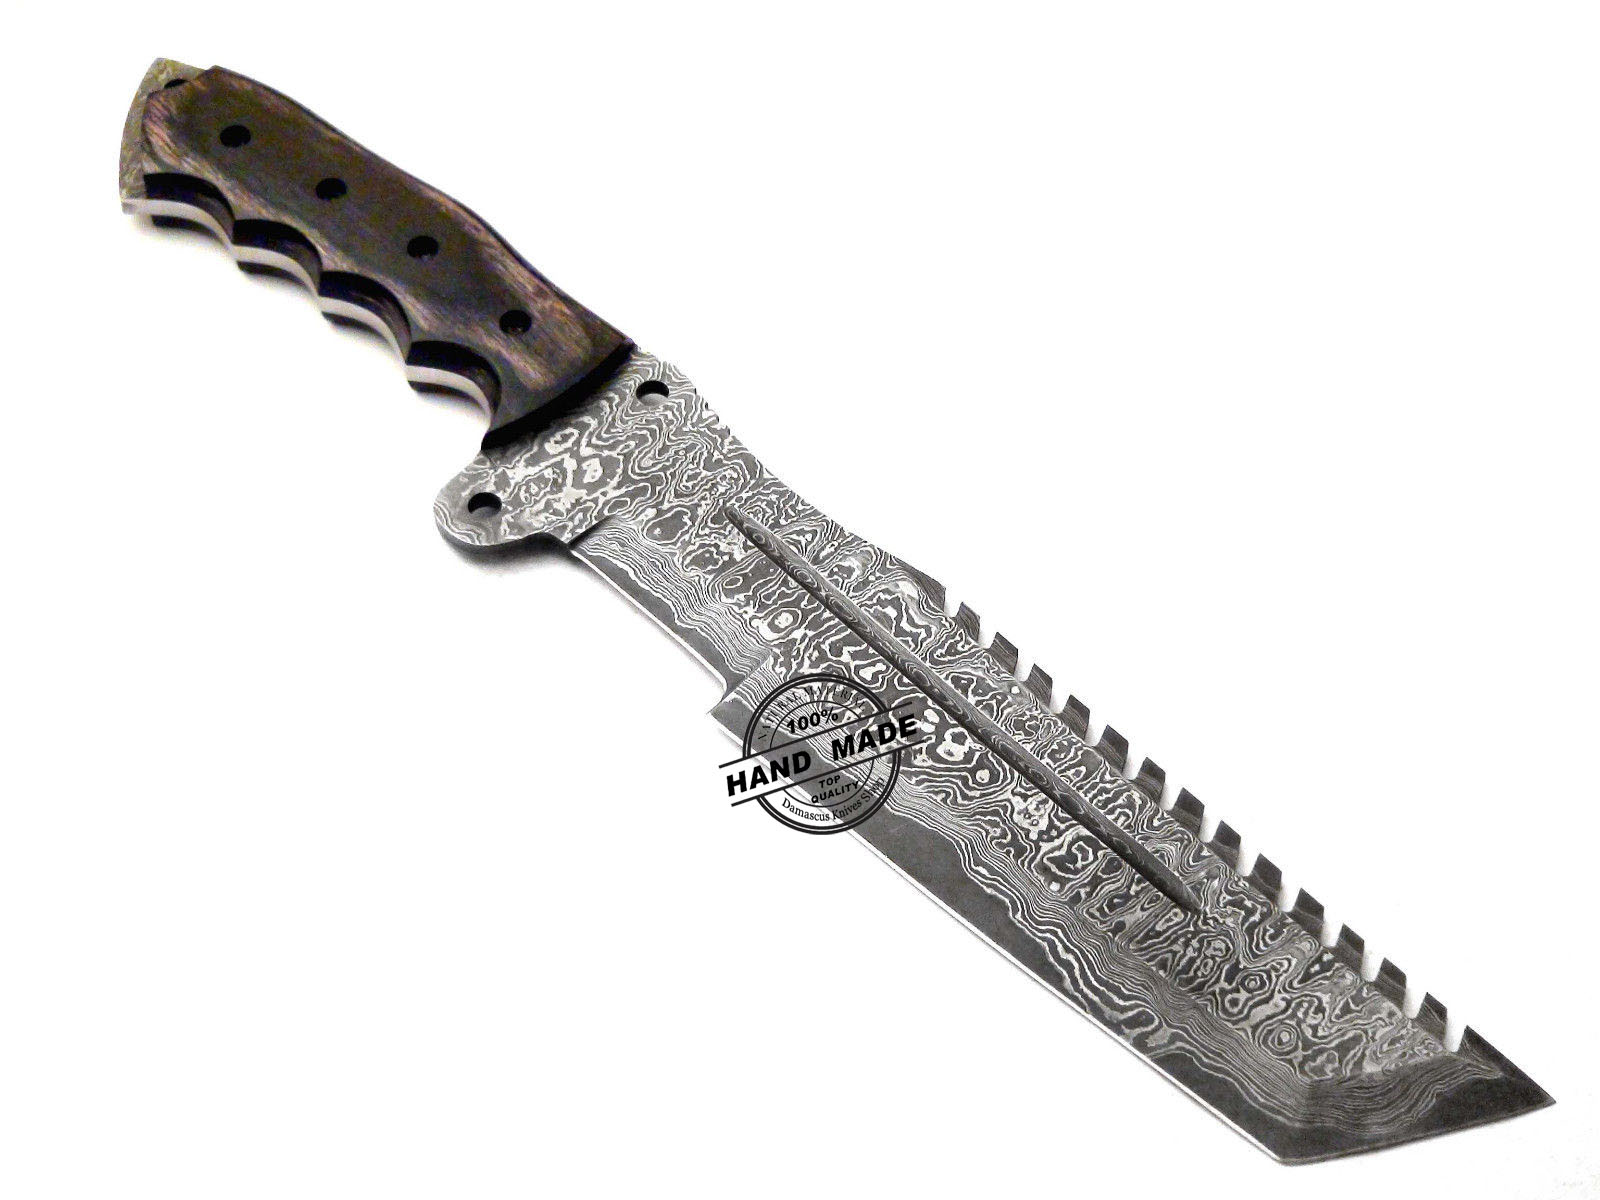 Damascus Steel Knife for Sale